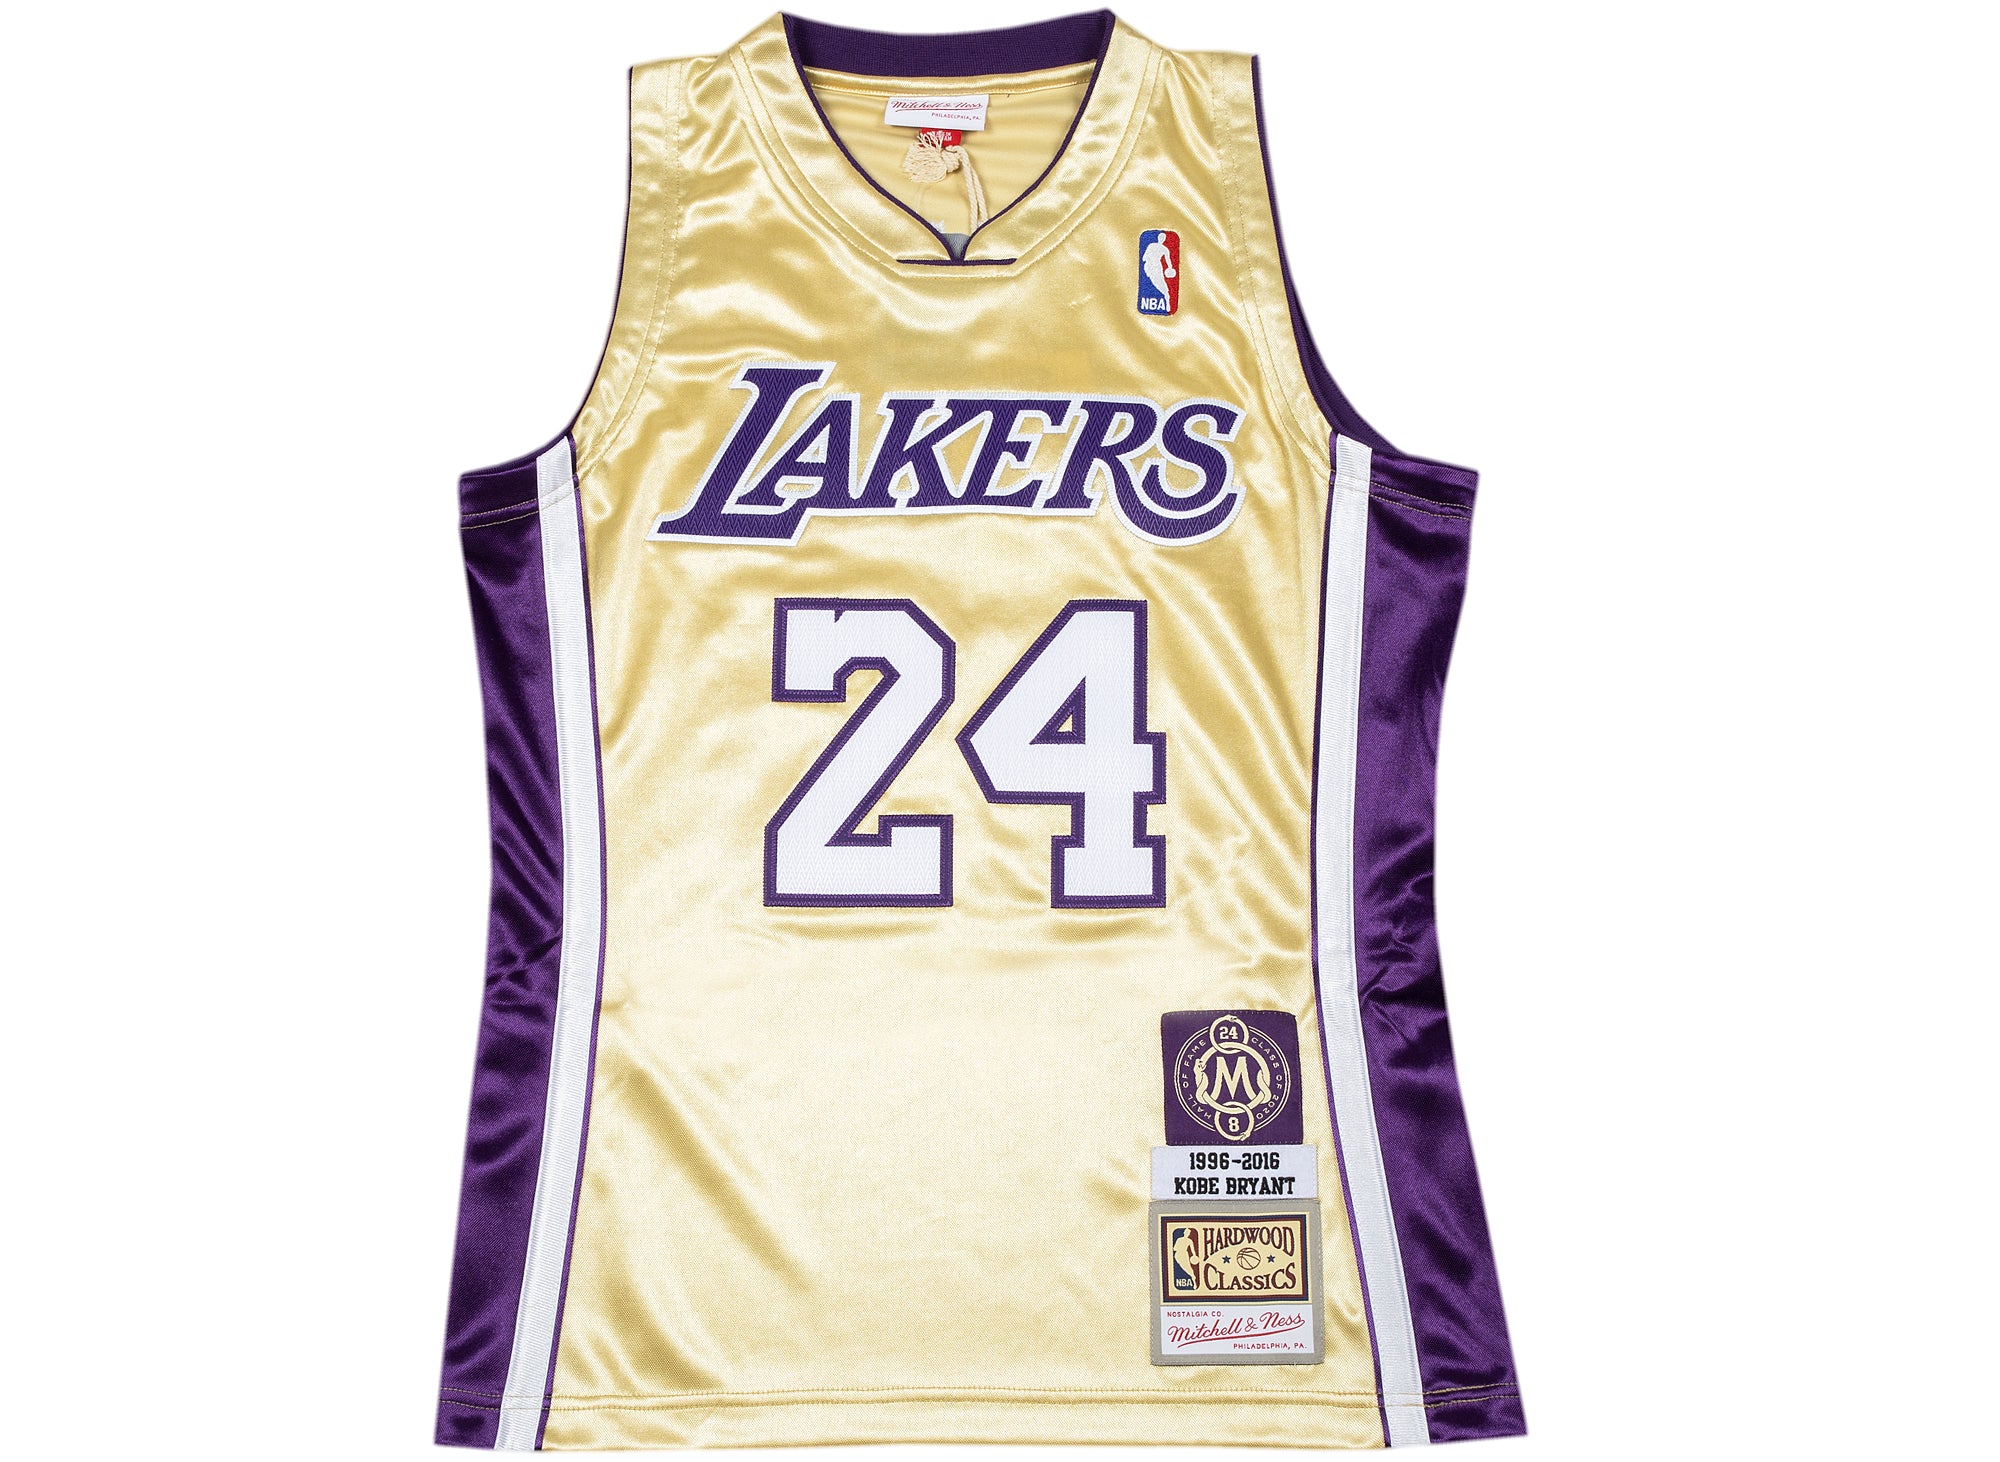 LOS ANGELES LAKERS KOBE BRYANT HALL OF FAME AUTHENTIC JERSEY  AJY4CP20022-LALPURP96KBR